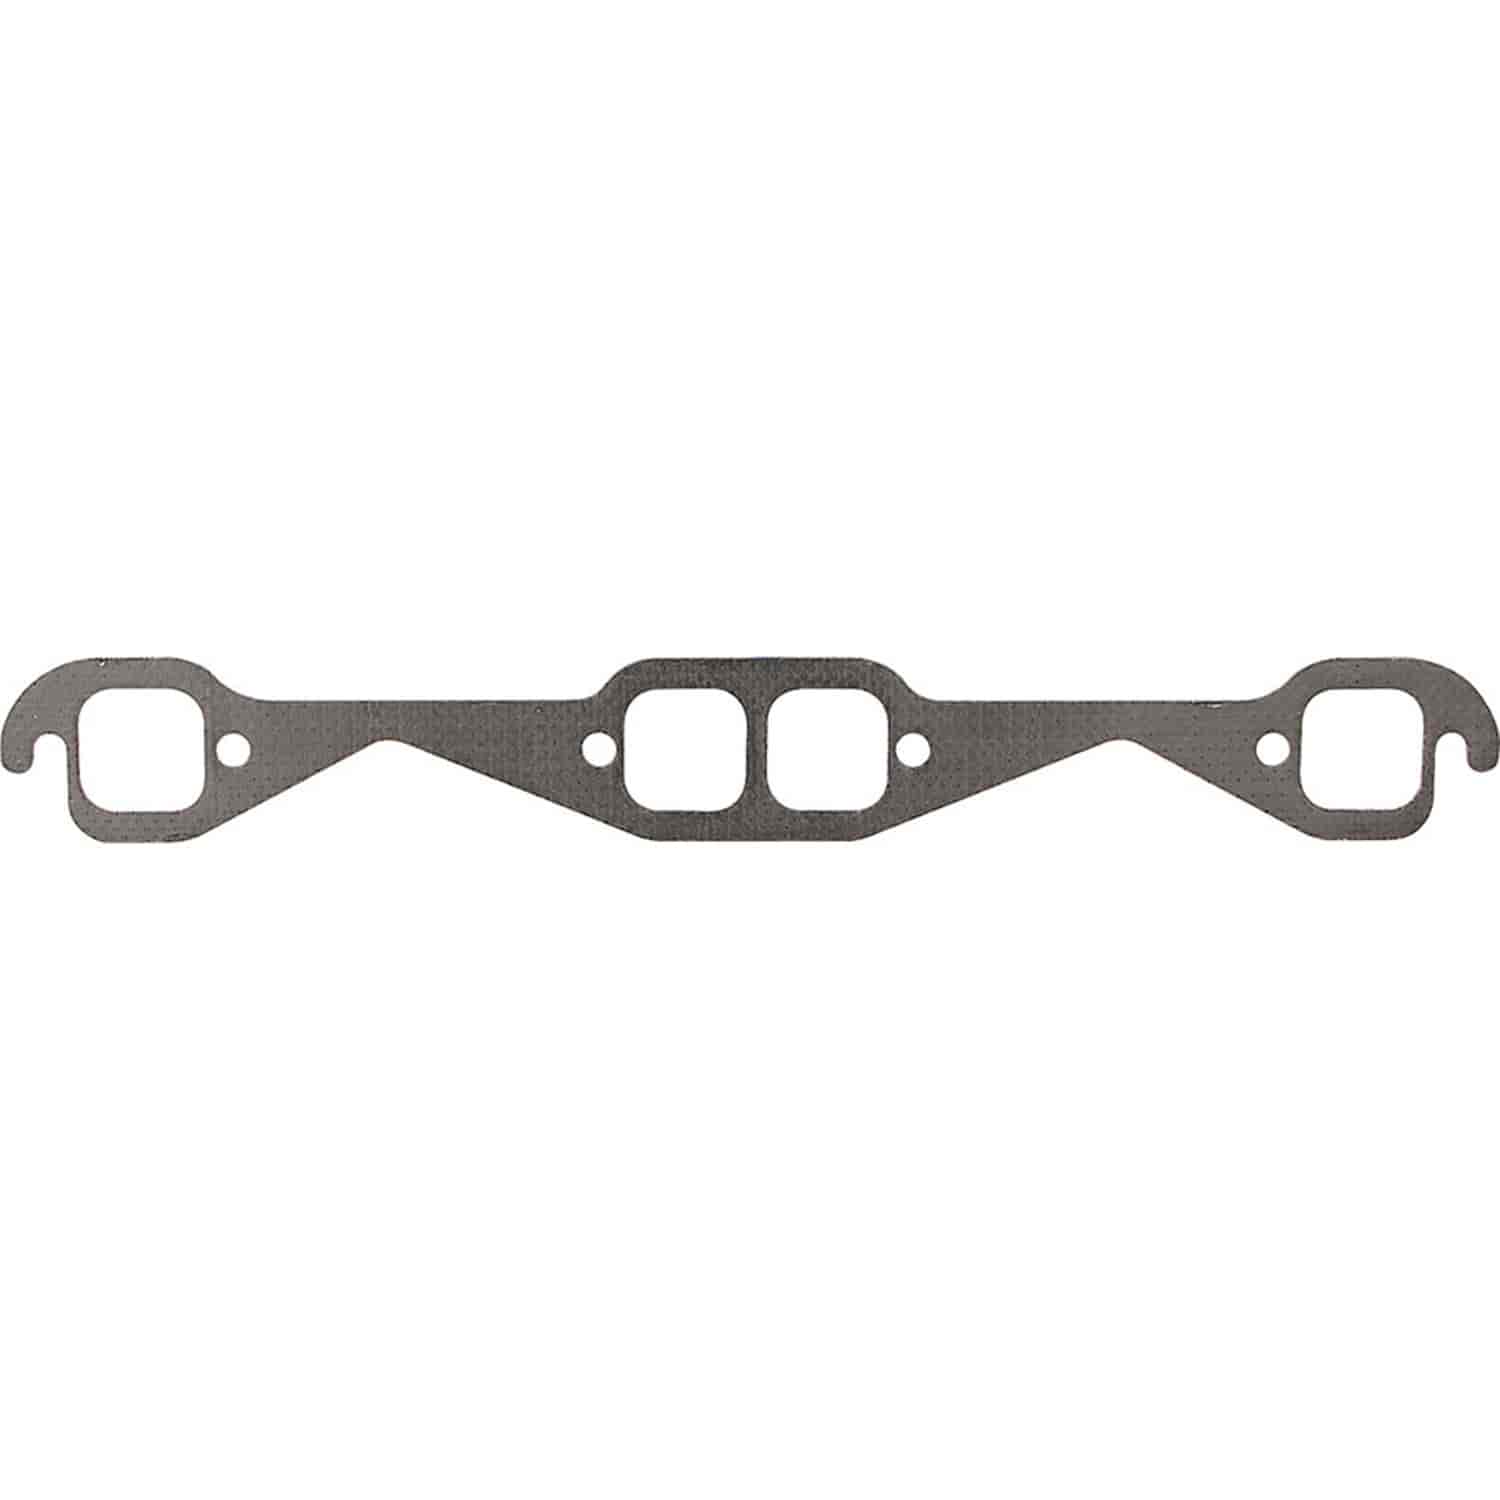 Small Block Chevy Header Gasket 1-5/8" Square Port Stock